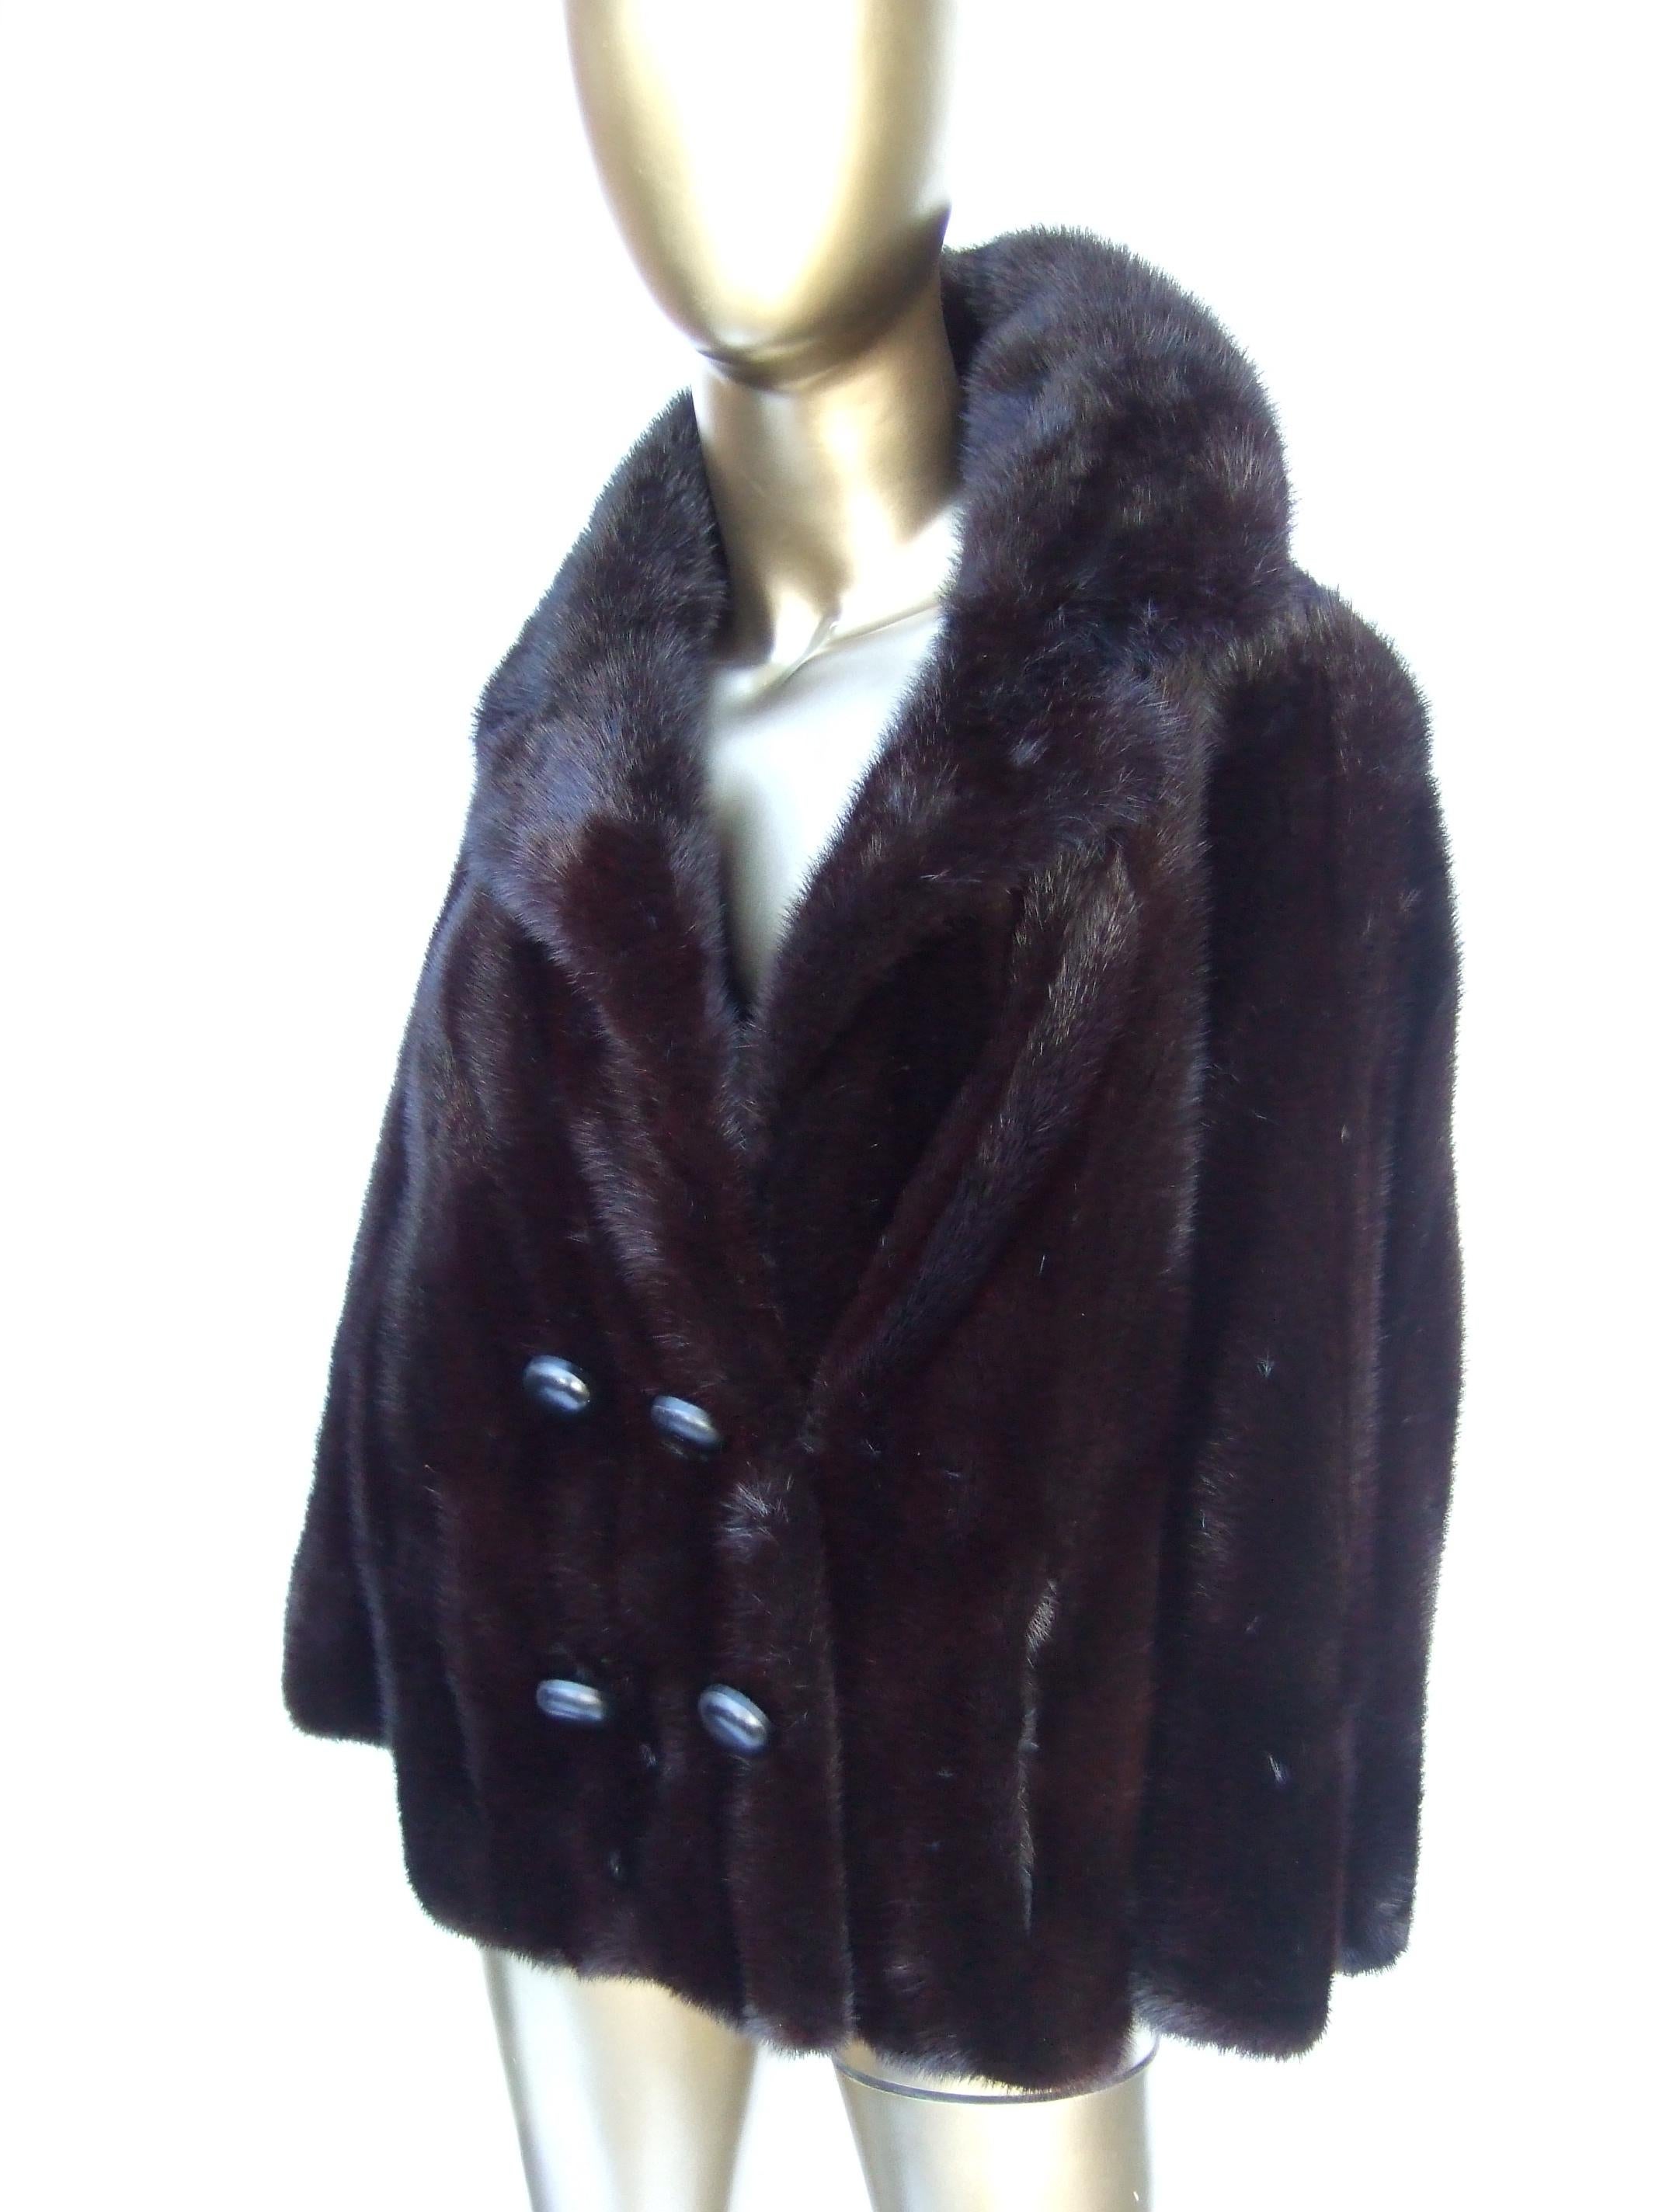 Luxurious mahogany plush dark brown mink fur jacket by Bill Marre' c 1970s
The stylish vintage jacket is designed with lustrous soft mink fur
Adorned with four decorative stationary buttons on the lower front
Secures closed with a hidden hook